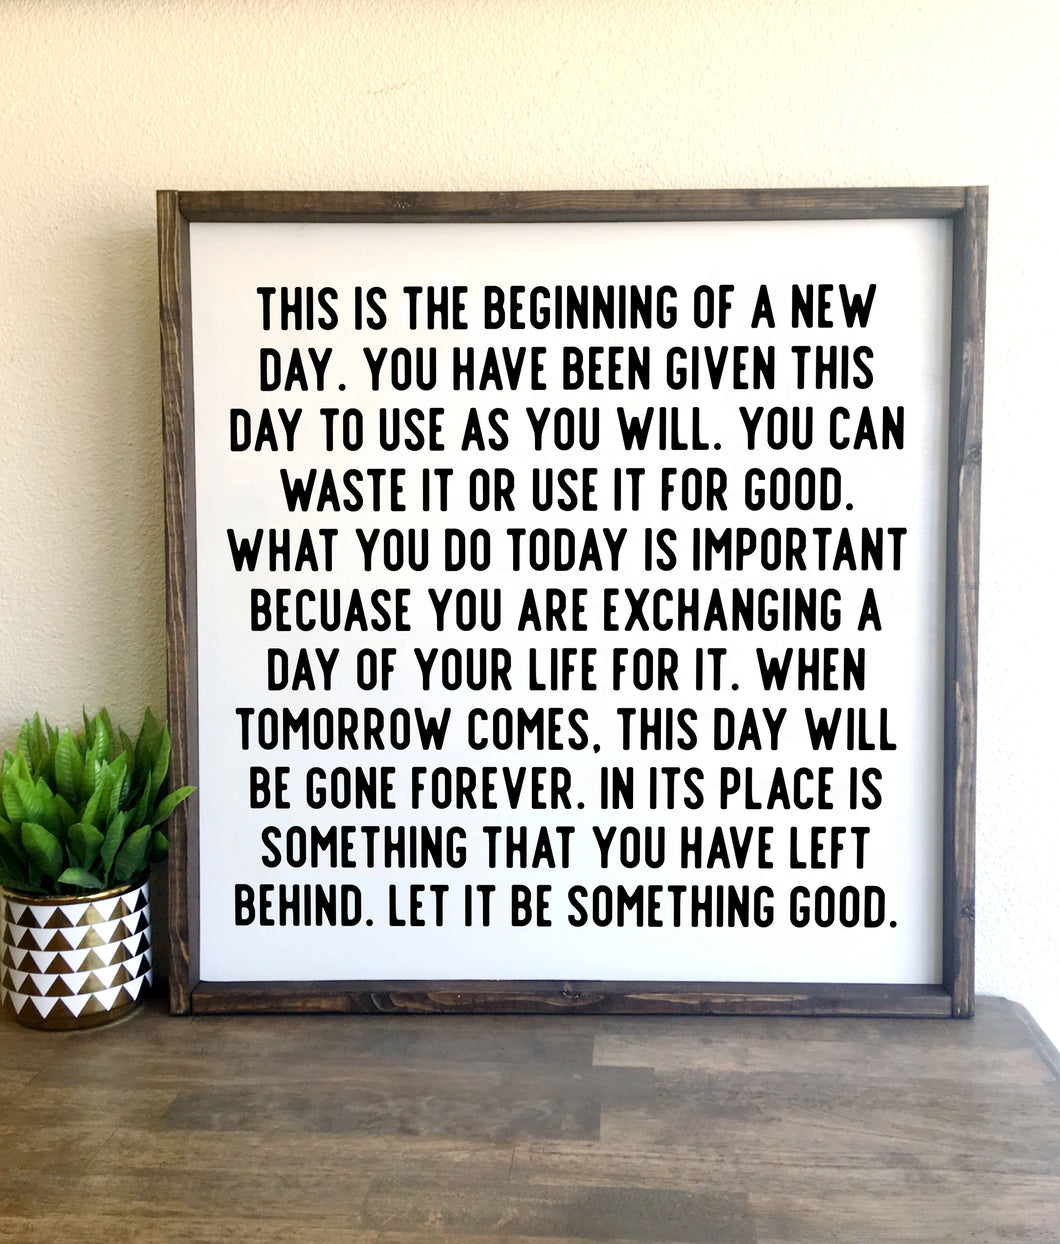 This is the beginning of a new day | Framed wood sign